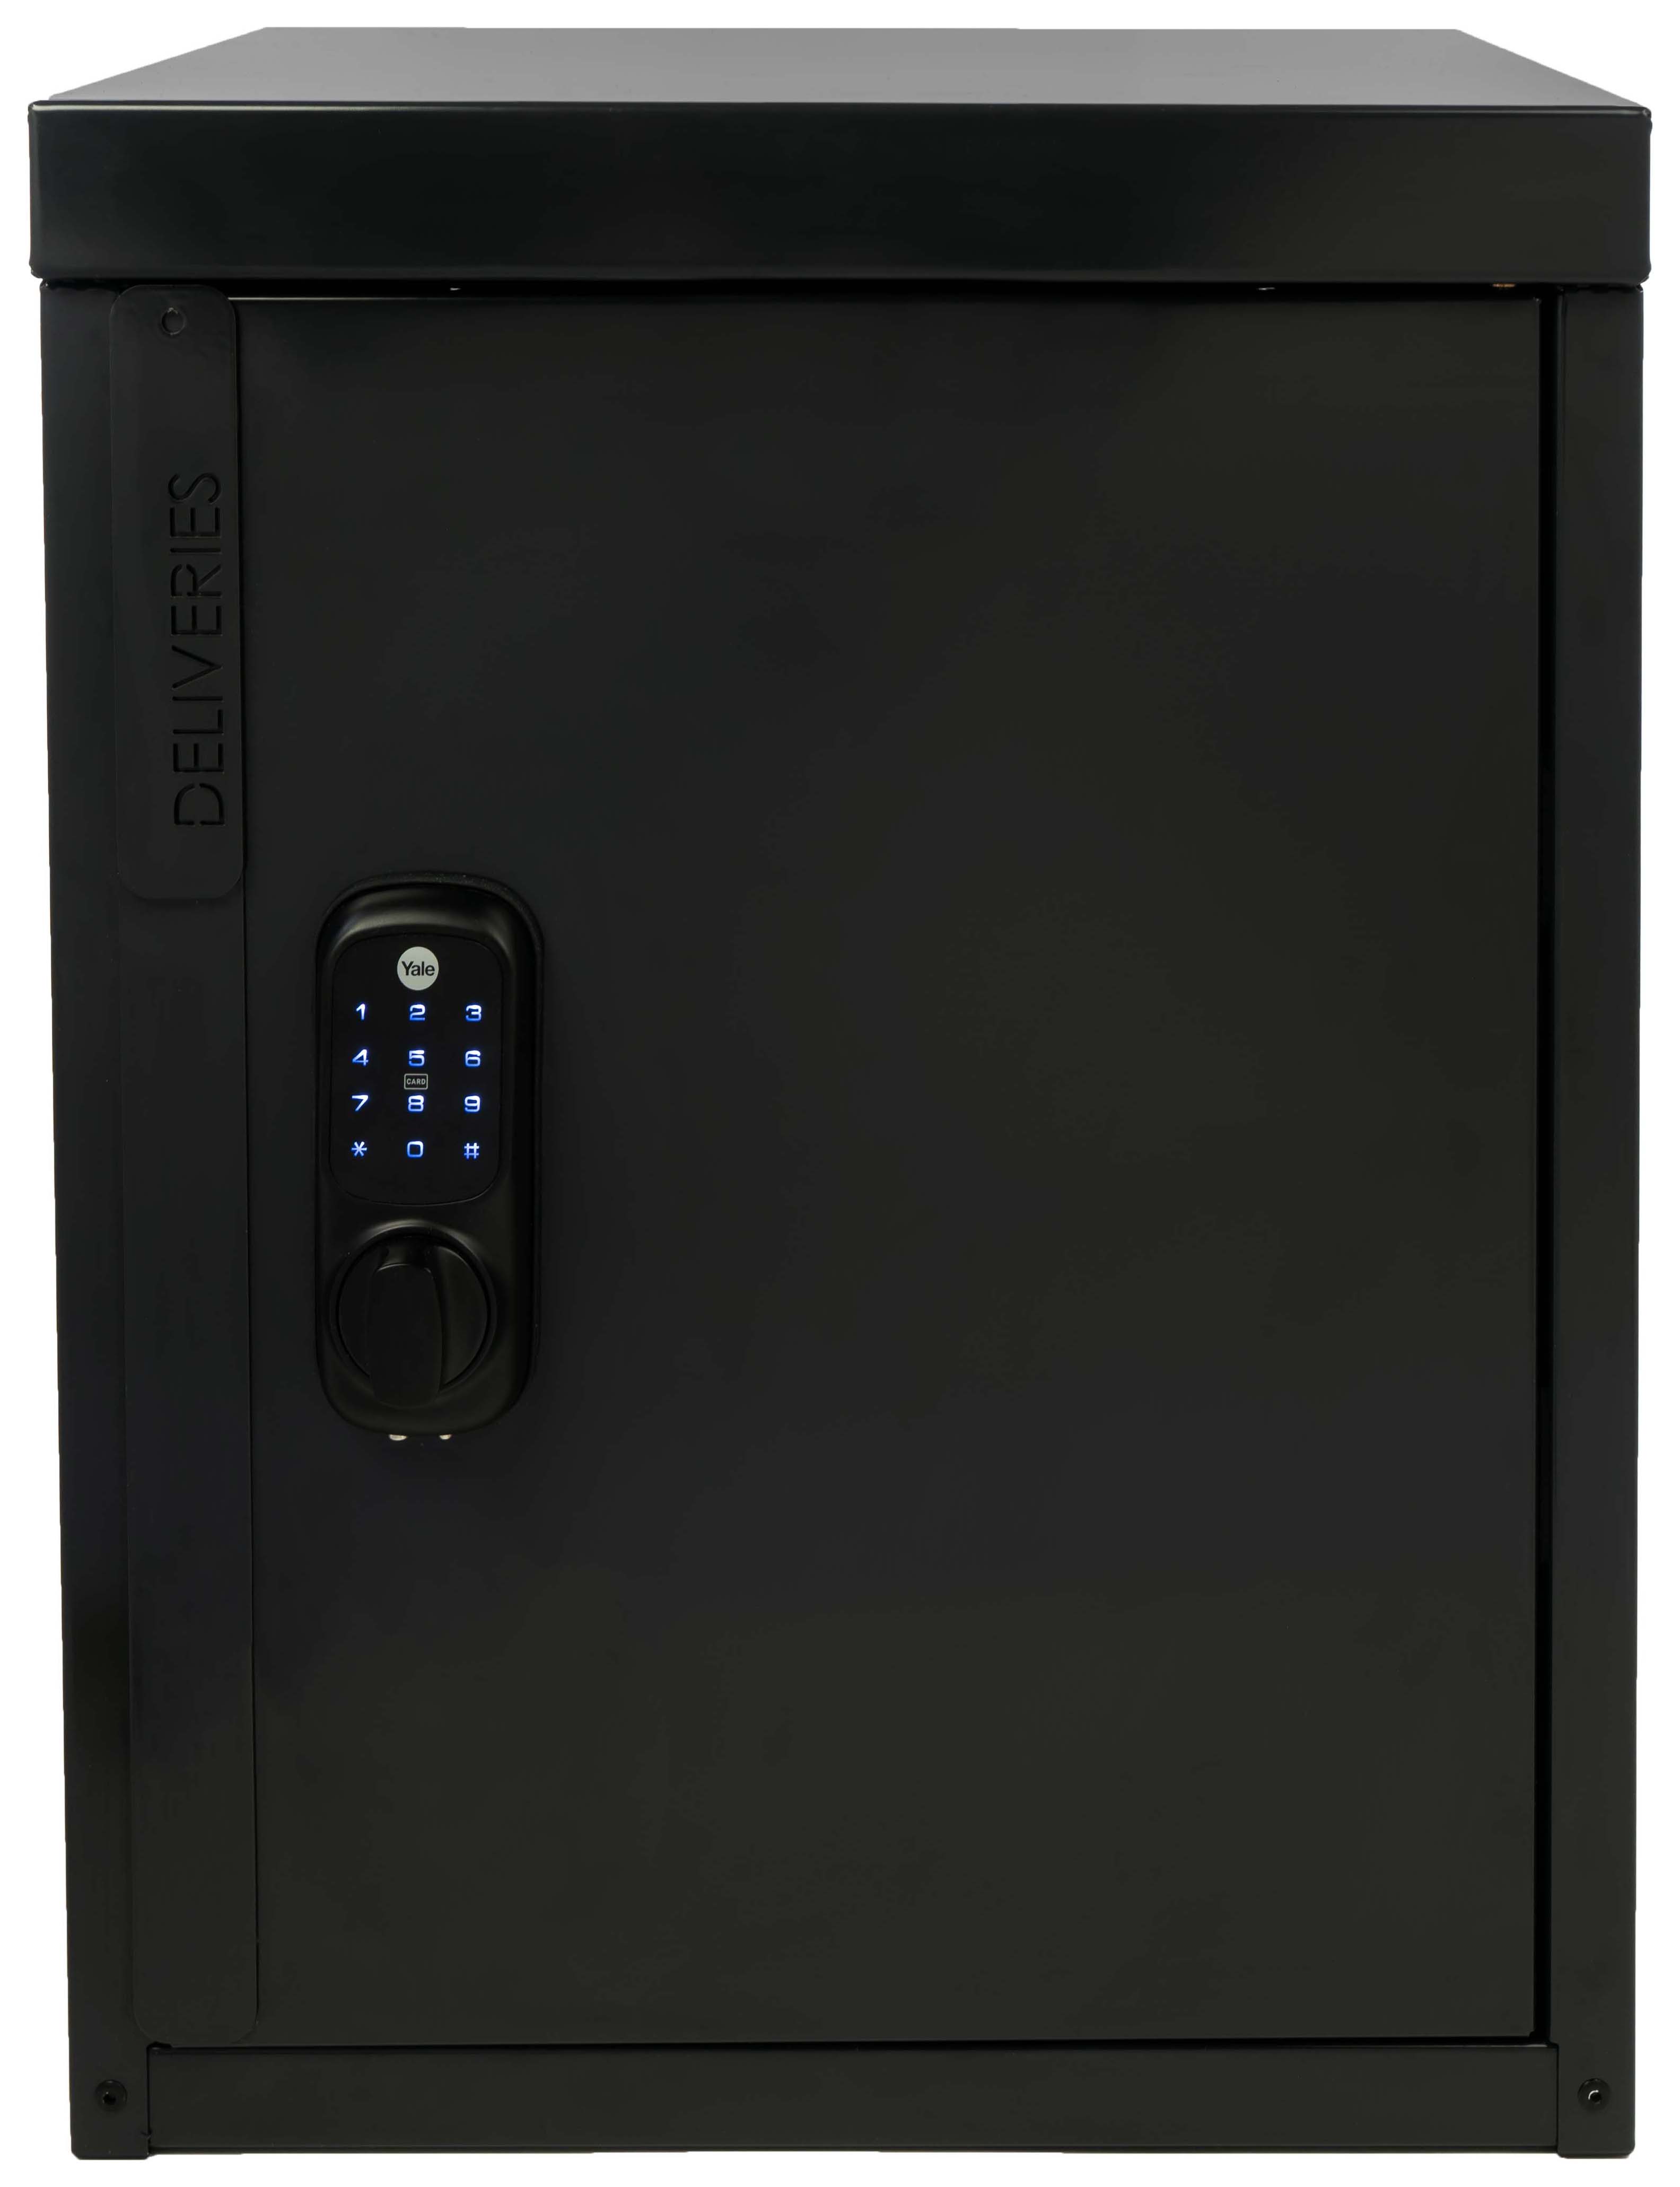 Yale Smart Delivery Box with Black Keyless Lock - Black